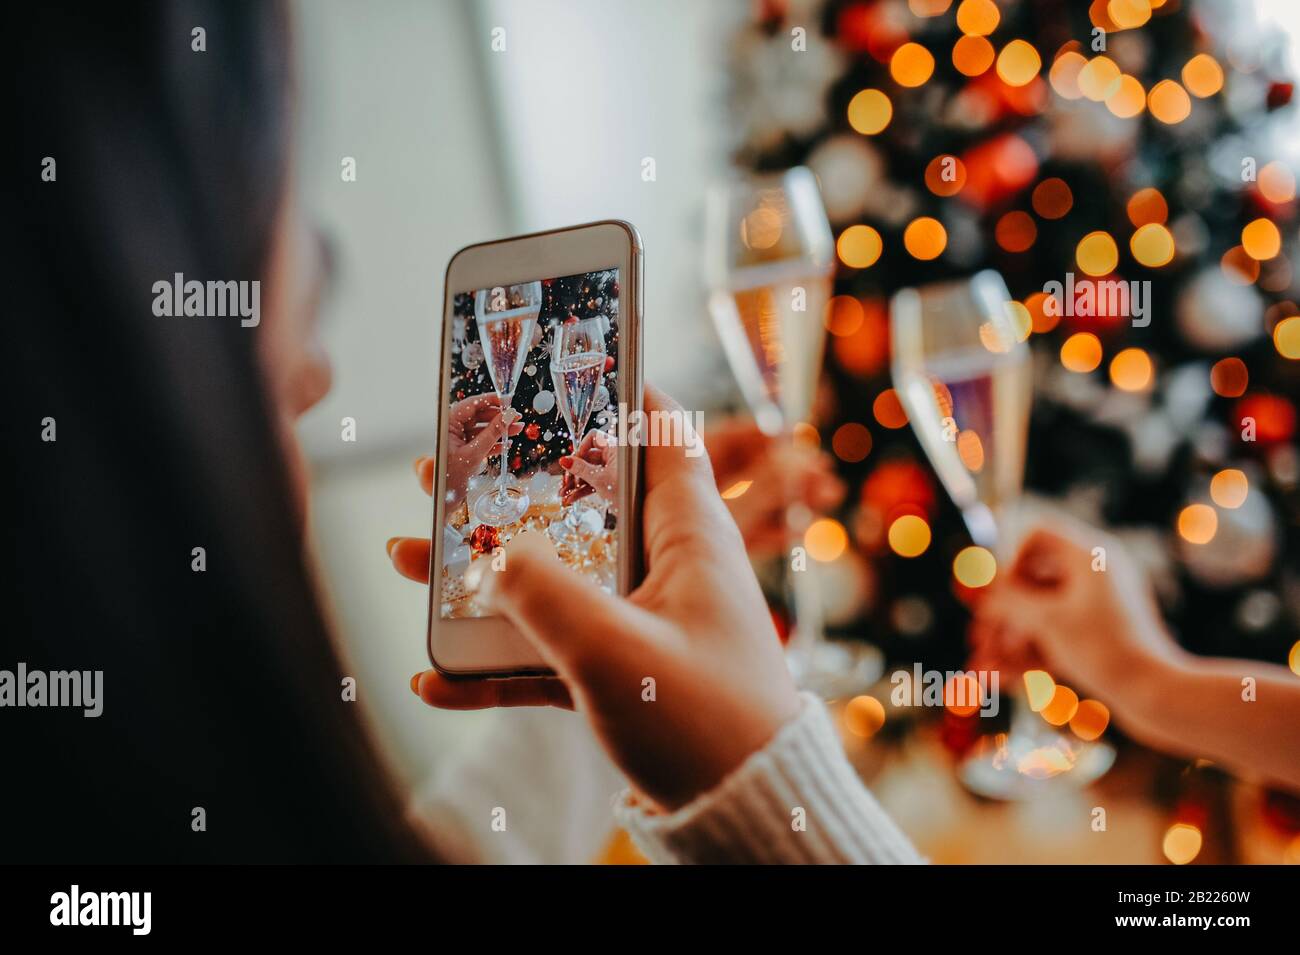 girl makes a photo on a white phone, two knocking glasses with champagne against the background of the Christmas tree in female hands Stock Photo